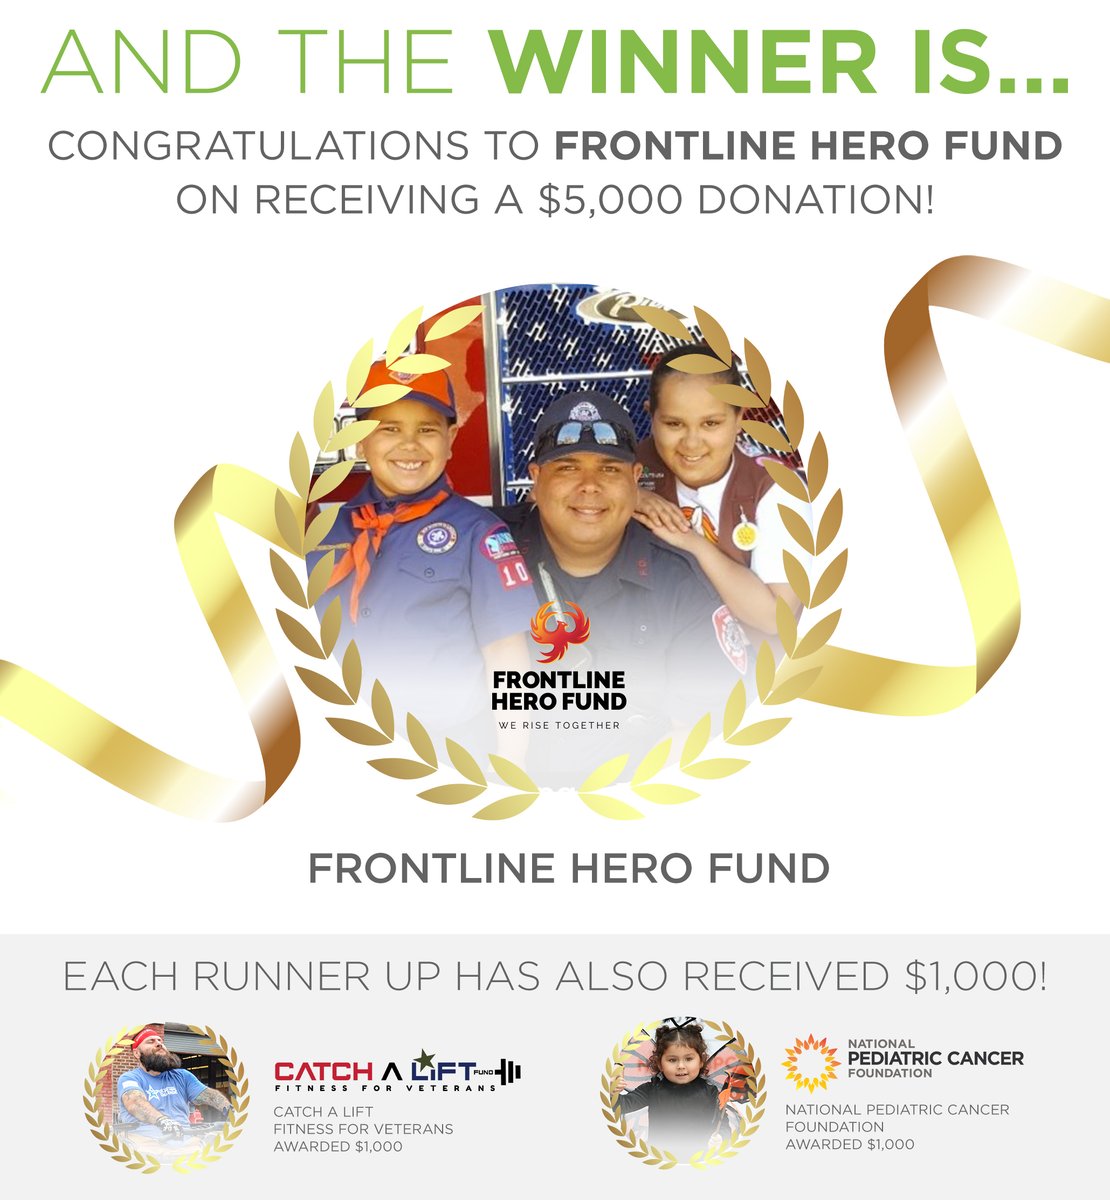 The people have spoken! 🥳 #FrontlineHeroFund is the #winner of this year’s #charitygiveaway2020, receiving a $5,000 donation 💵 Thank you to @PediatricCancer & @CatchALiftFund for participating—each will receive $1,000 as well! We received a total of 9️⃣6️⃣0️⃣9️⃣ votes—INCREDIBLE!